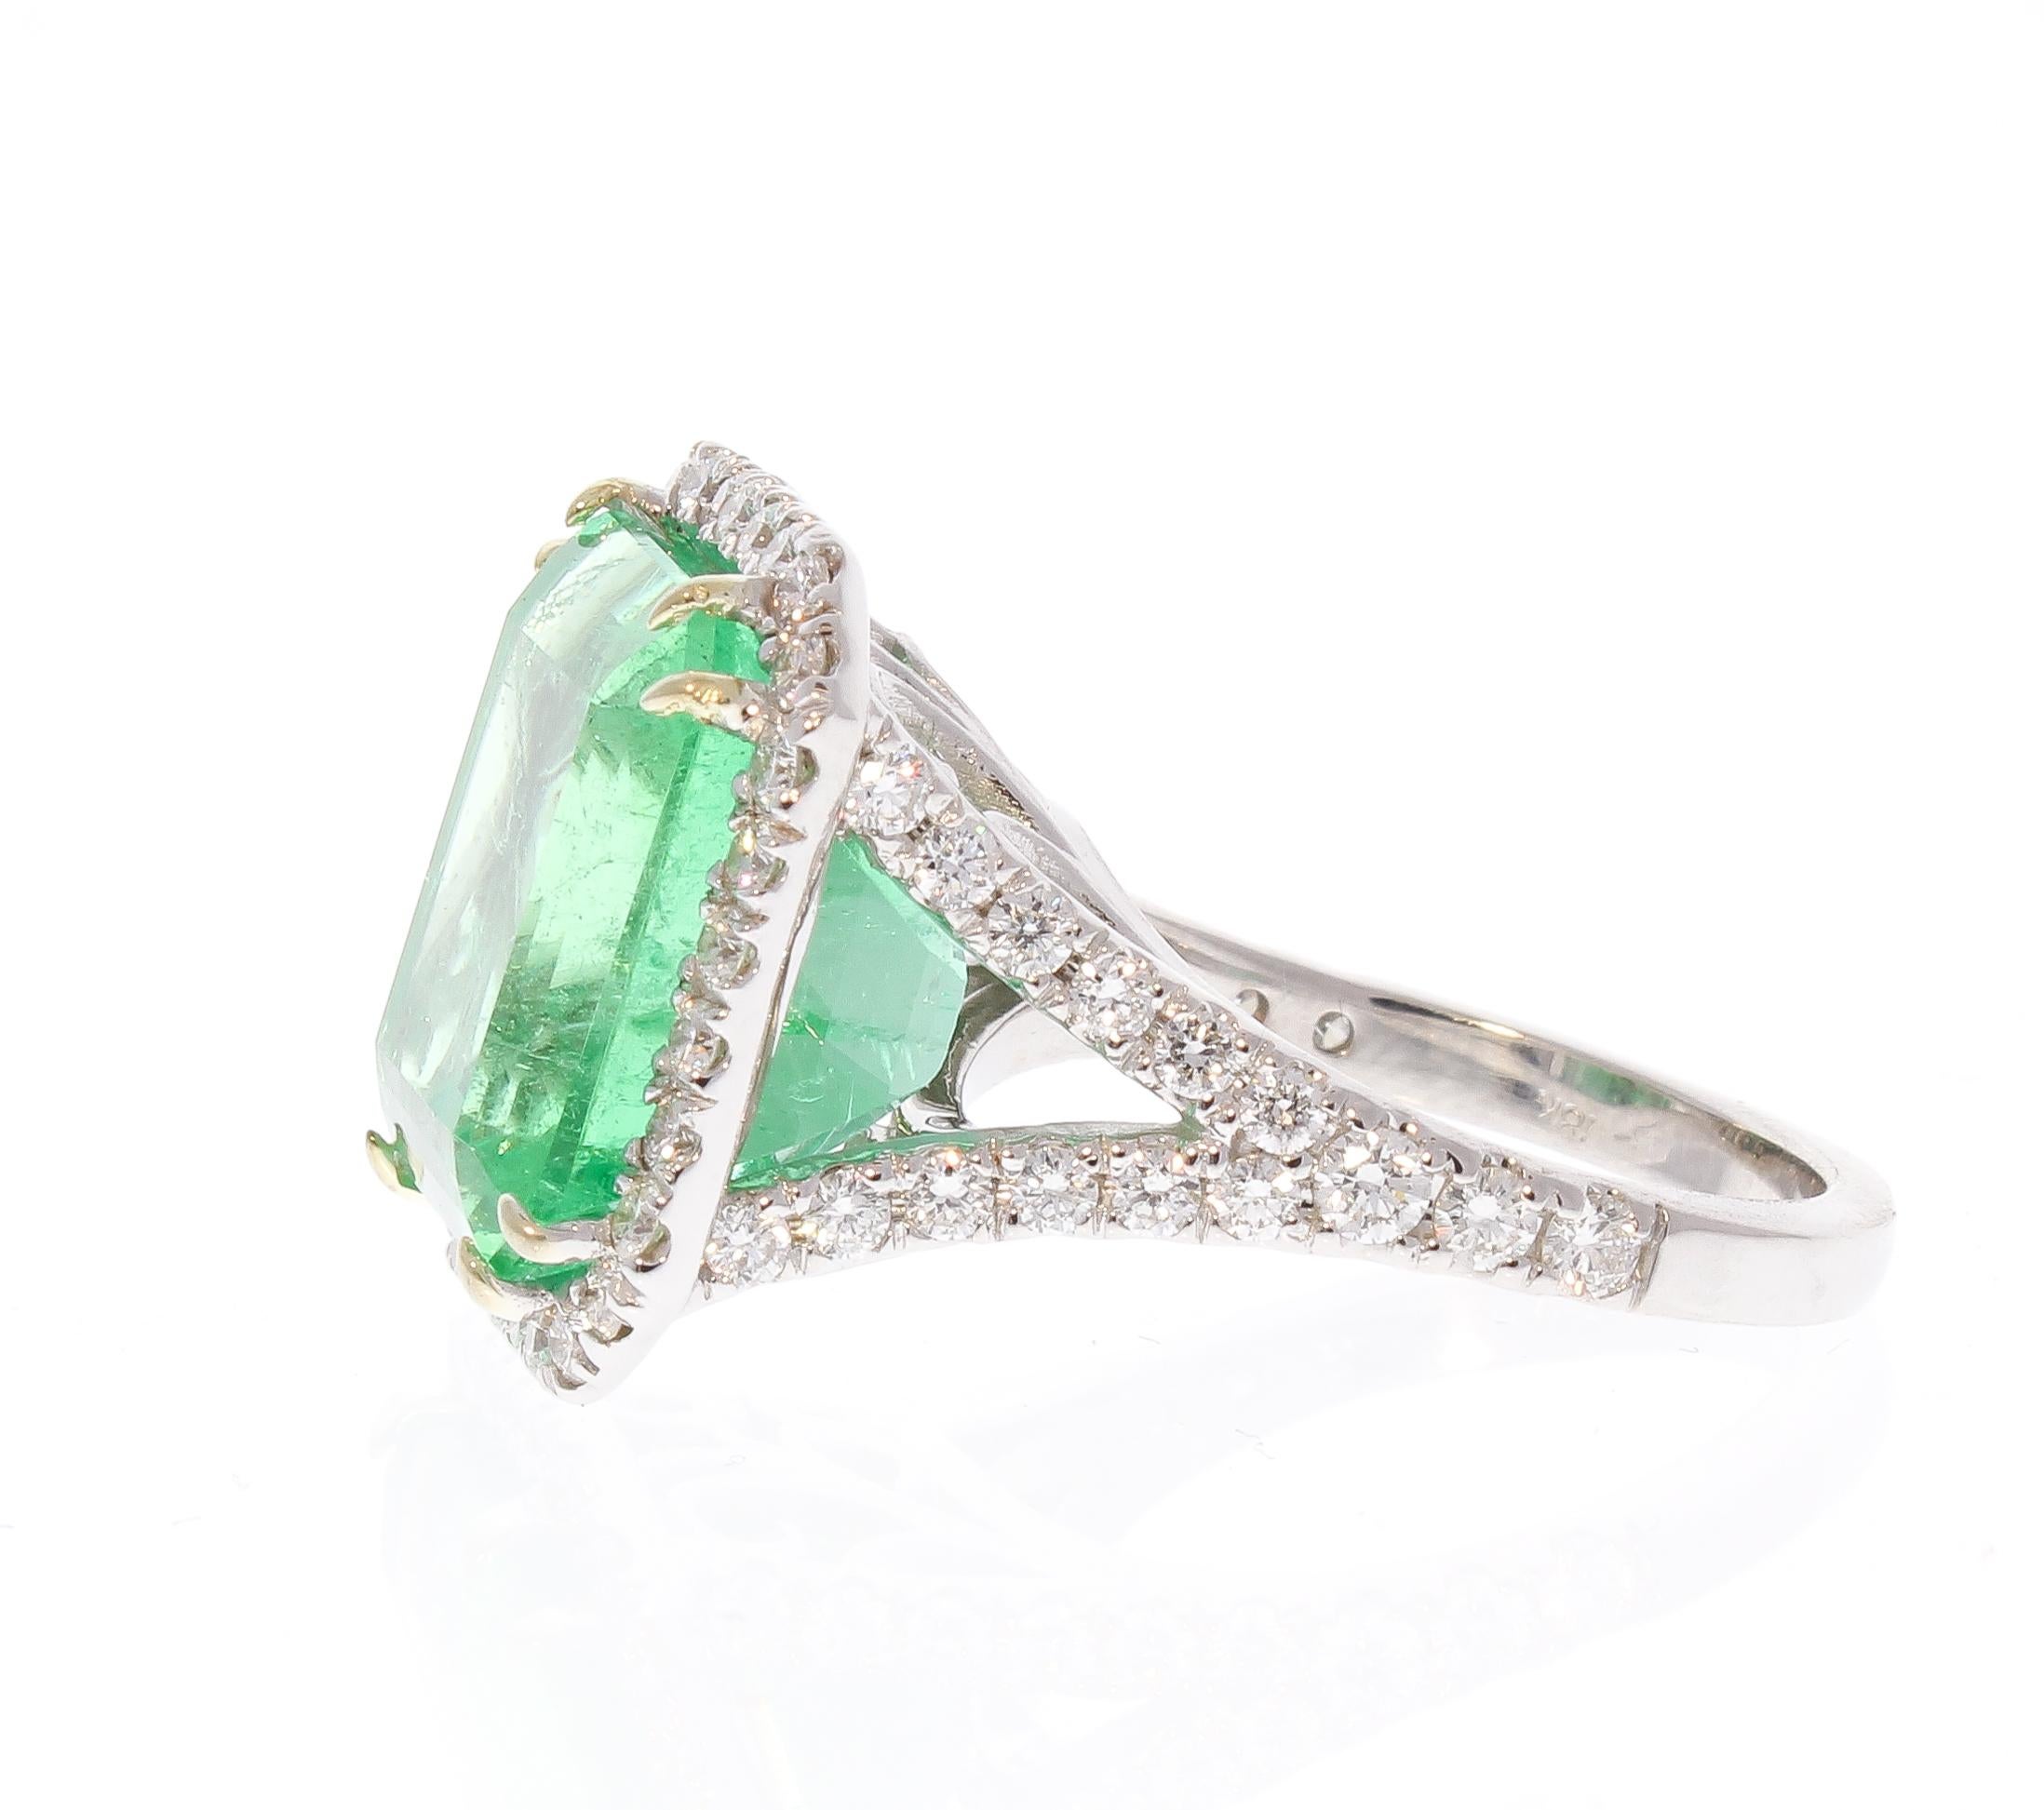 PGS Certified 13.06 Carat Colombian Emerald Cut Emerald and Diamond 18K Ring 1